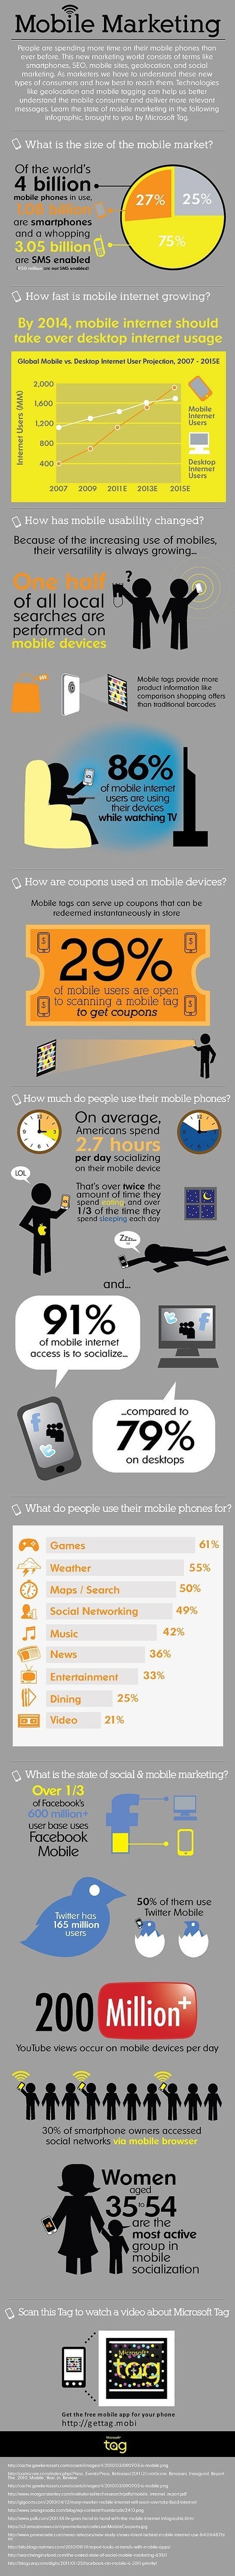 The Mobile Social Audience is Evolving - Here's What's Happening [Infographic] | WEBOLUTION! | Scoop.it